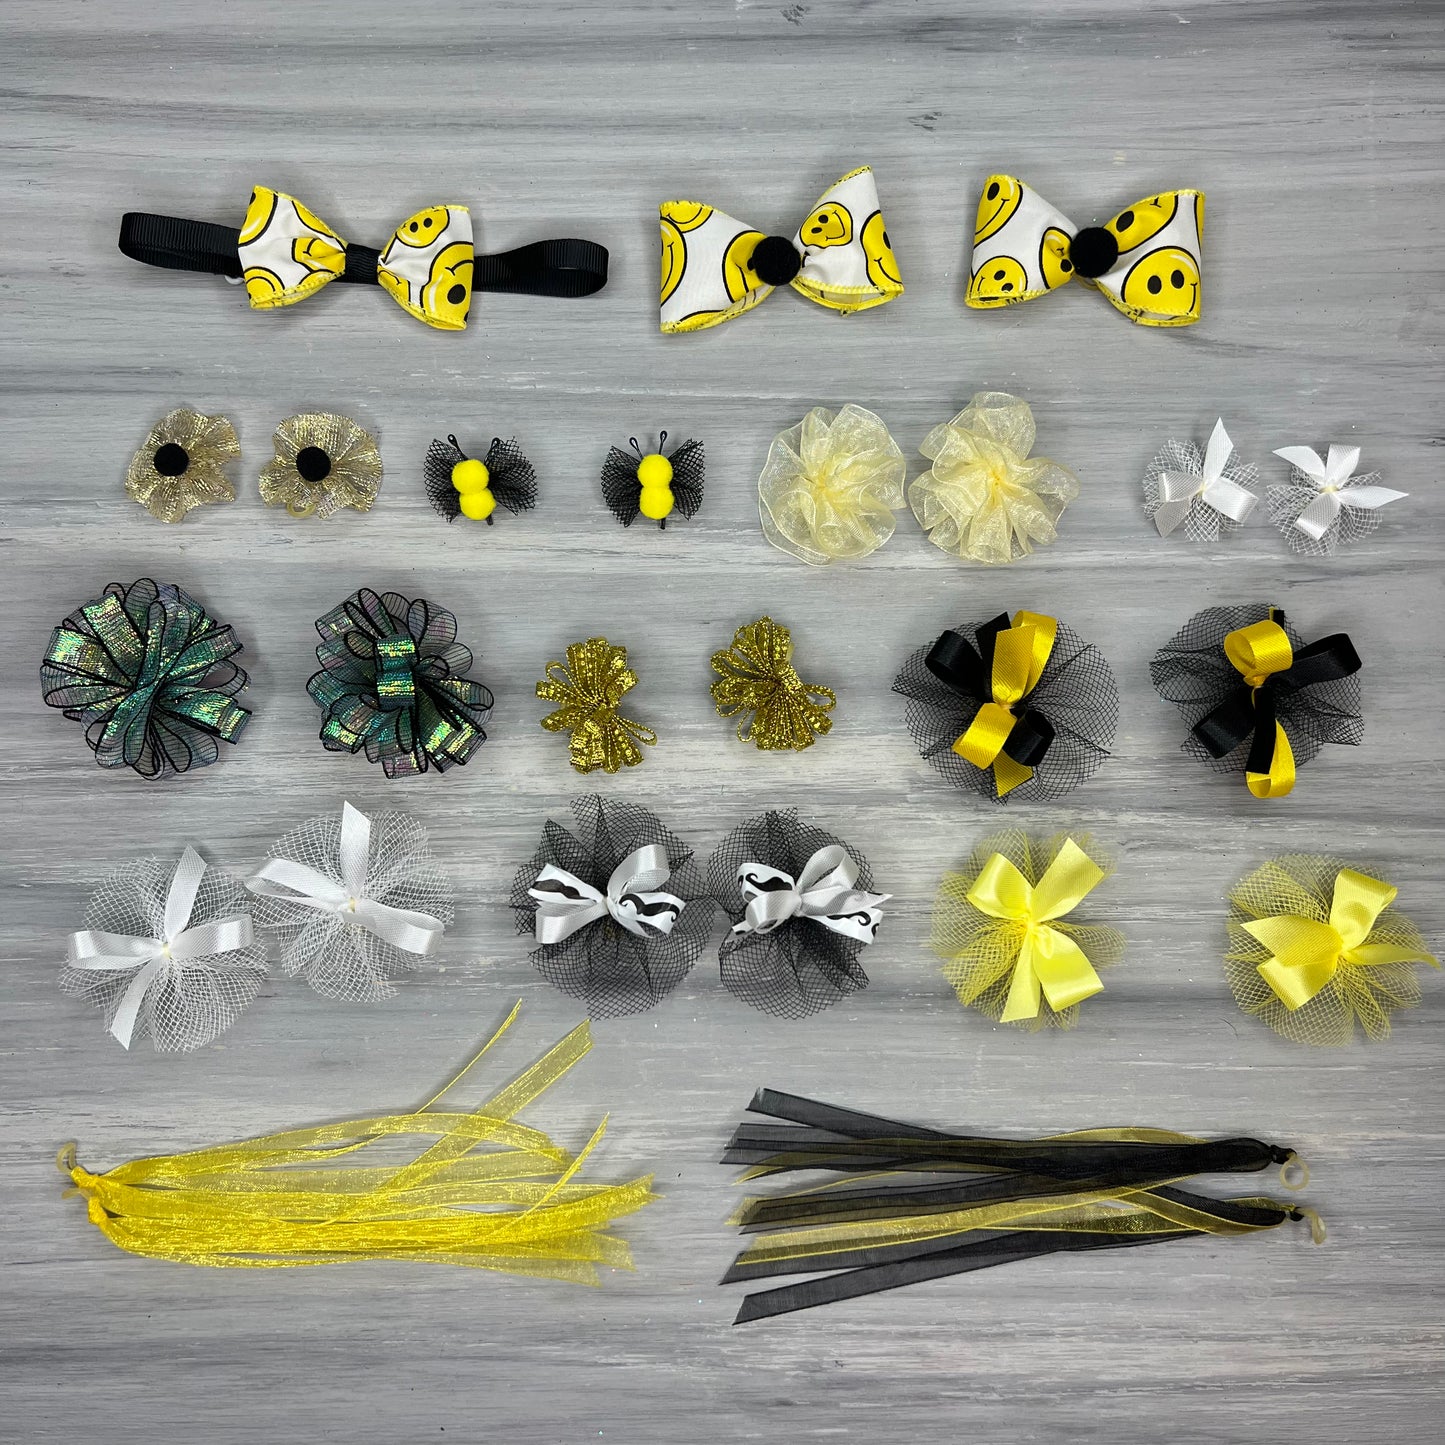 Black and Gold - 27 Piece Assortment